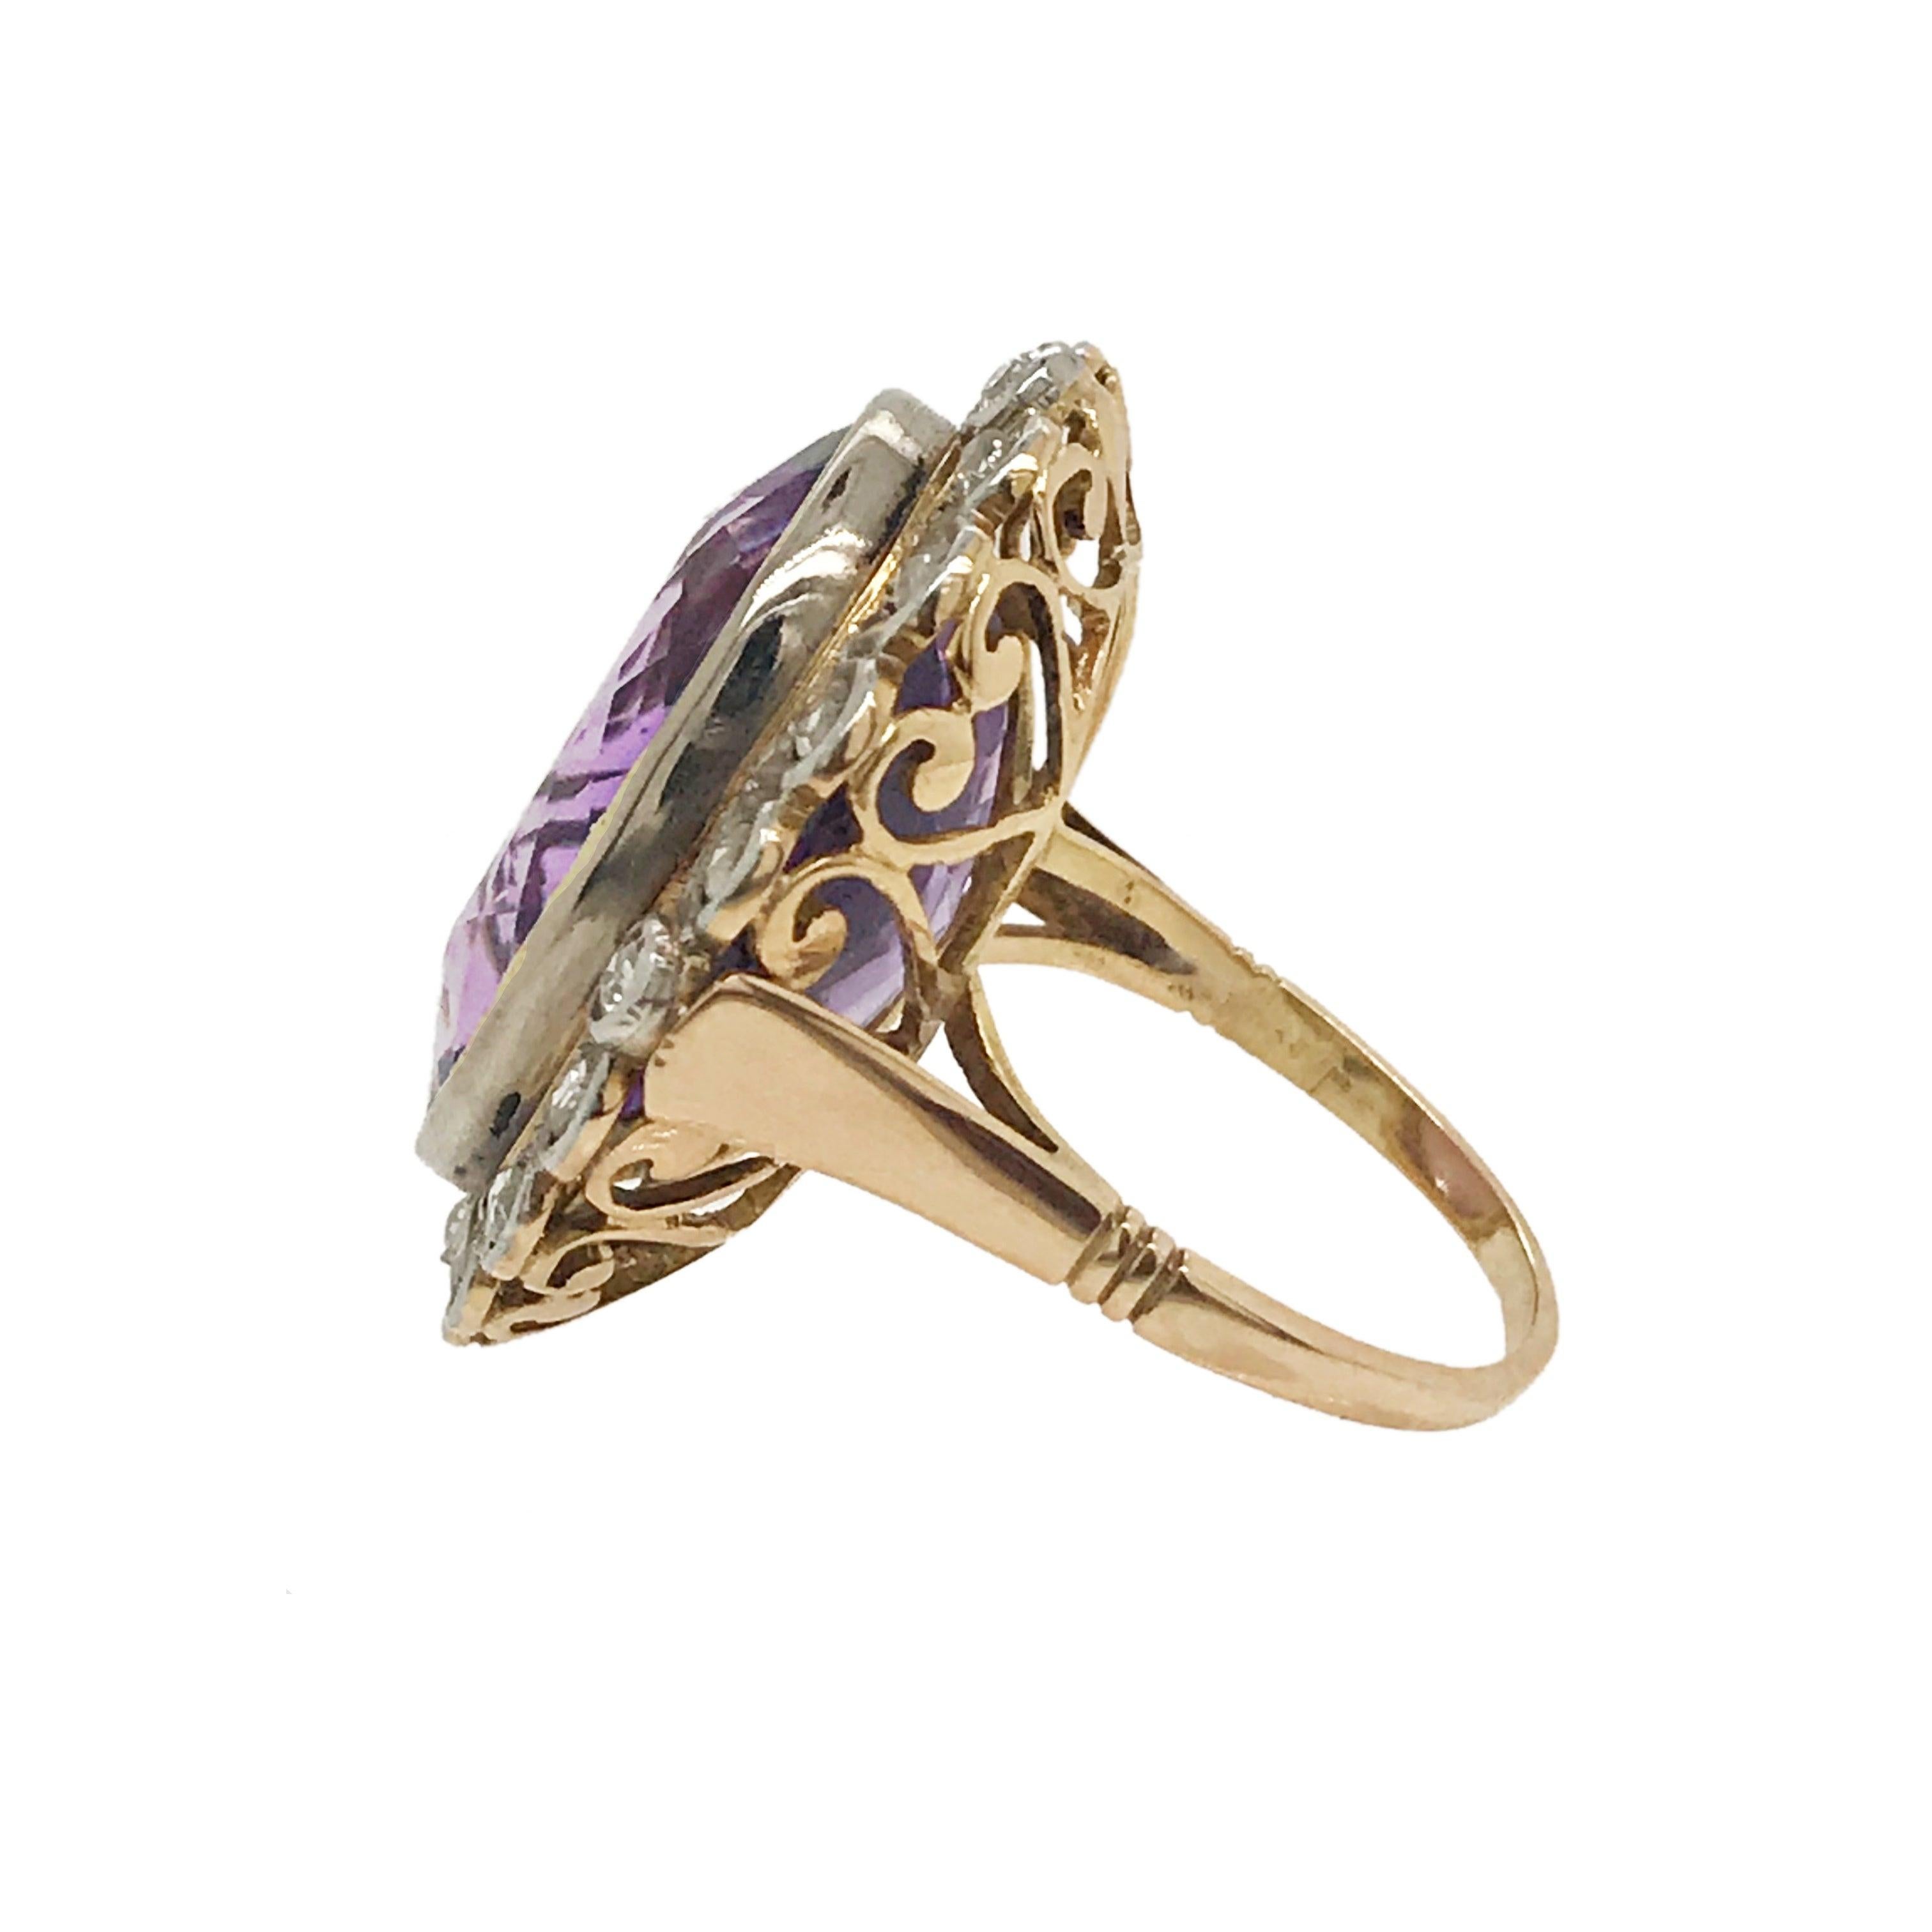 Vintage 16 Carat Amethyst and Diamond Ring Set in 18 Karat Gold In Excellent Condition For Sale In New Orleans, LA